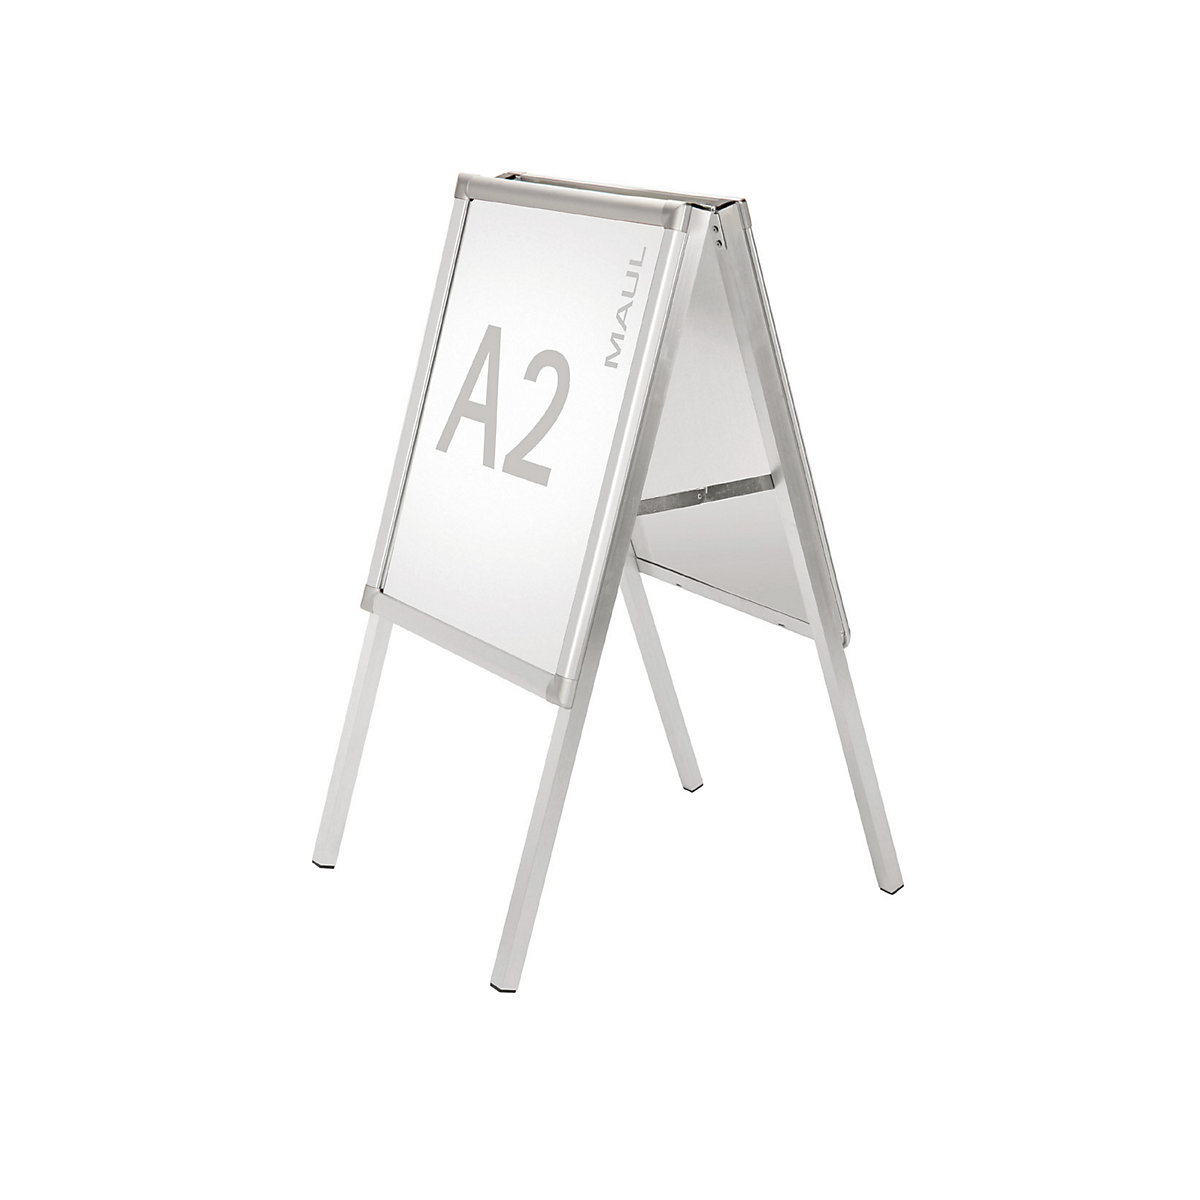 Display stand, double sided – MAUL